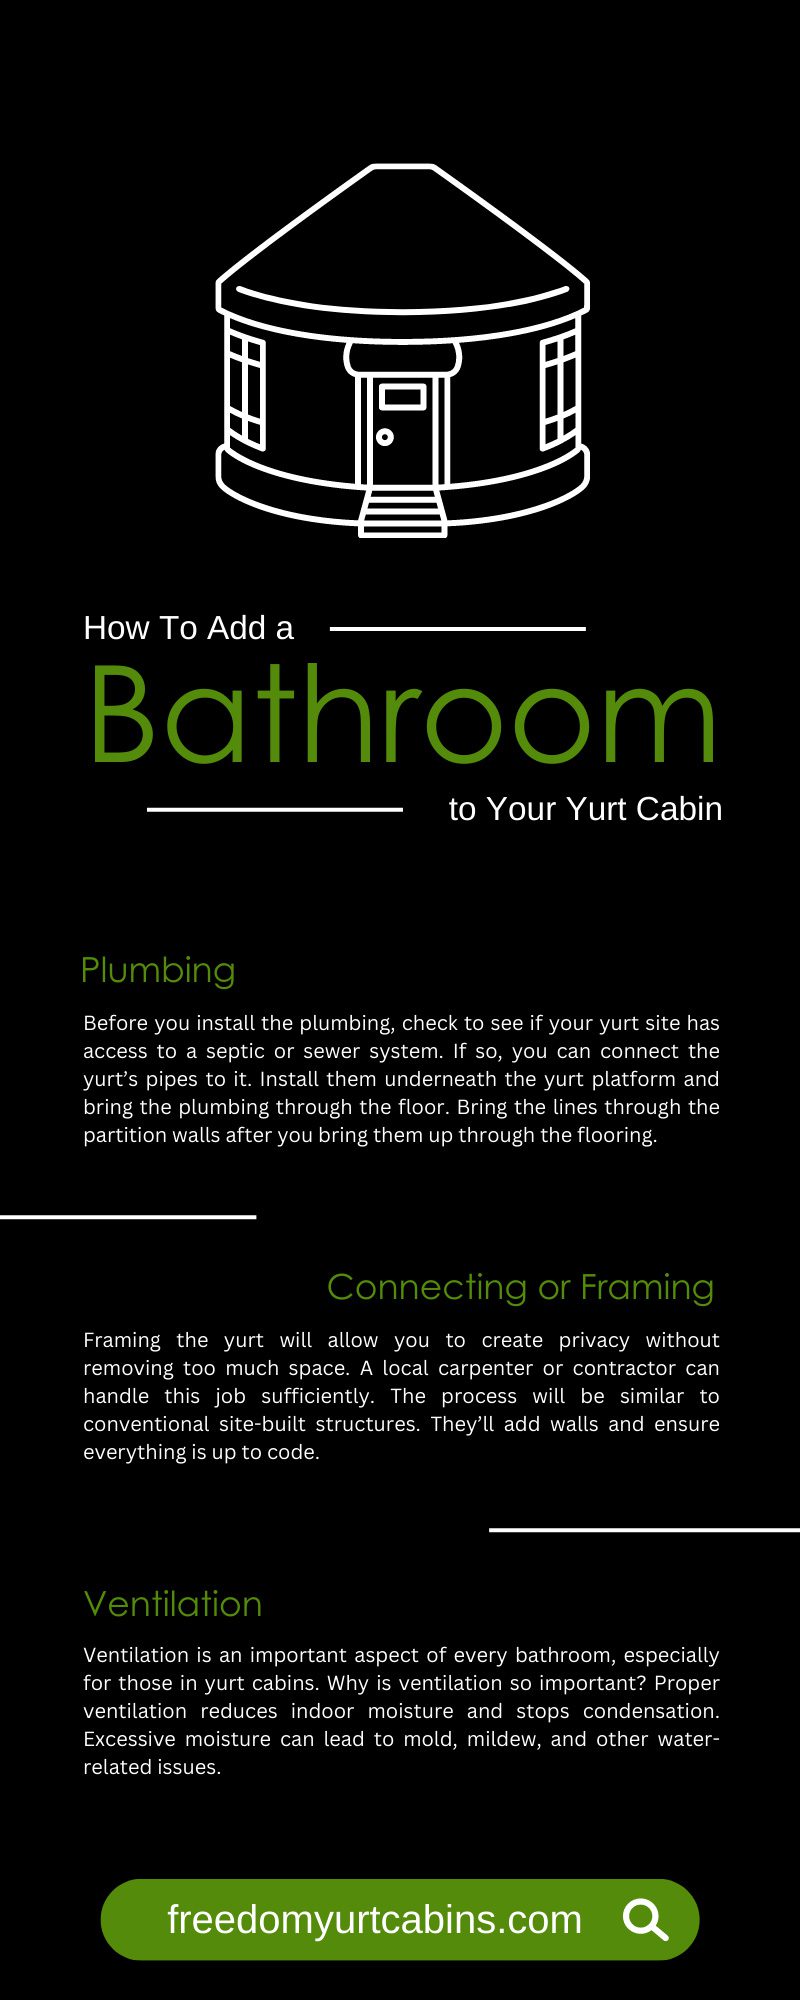 How To Add a Bathroom to Your Yurt Cabin